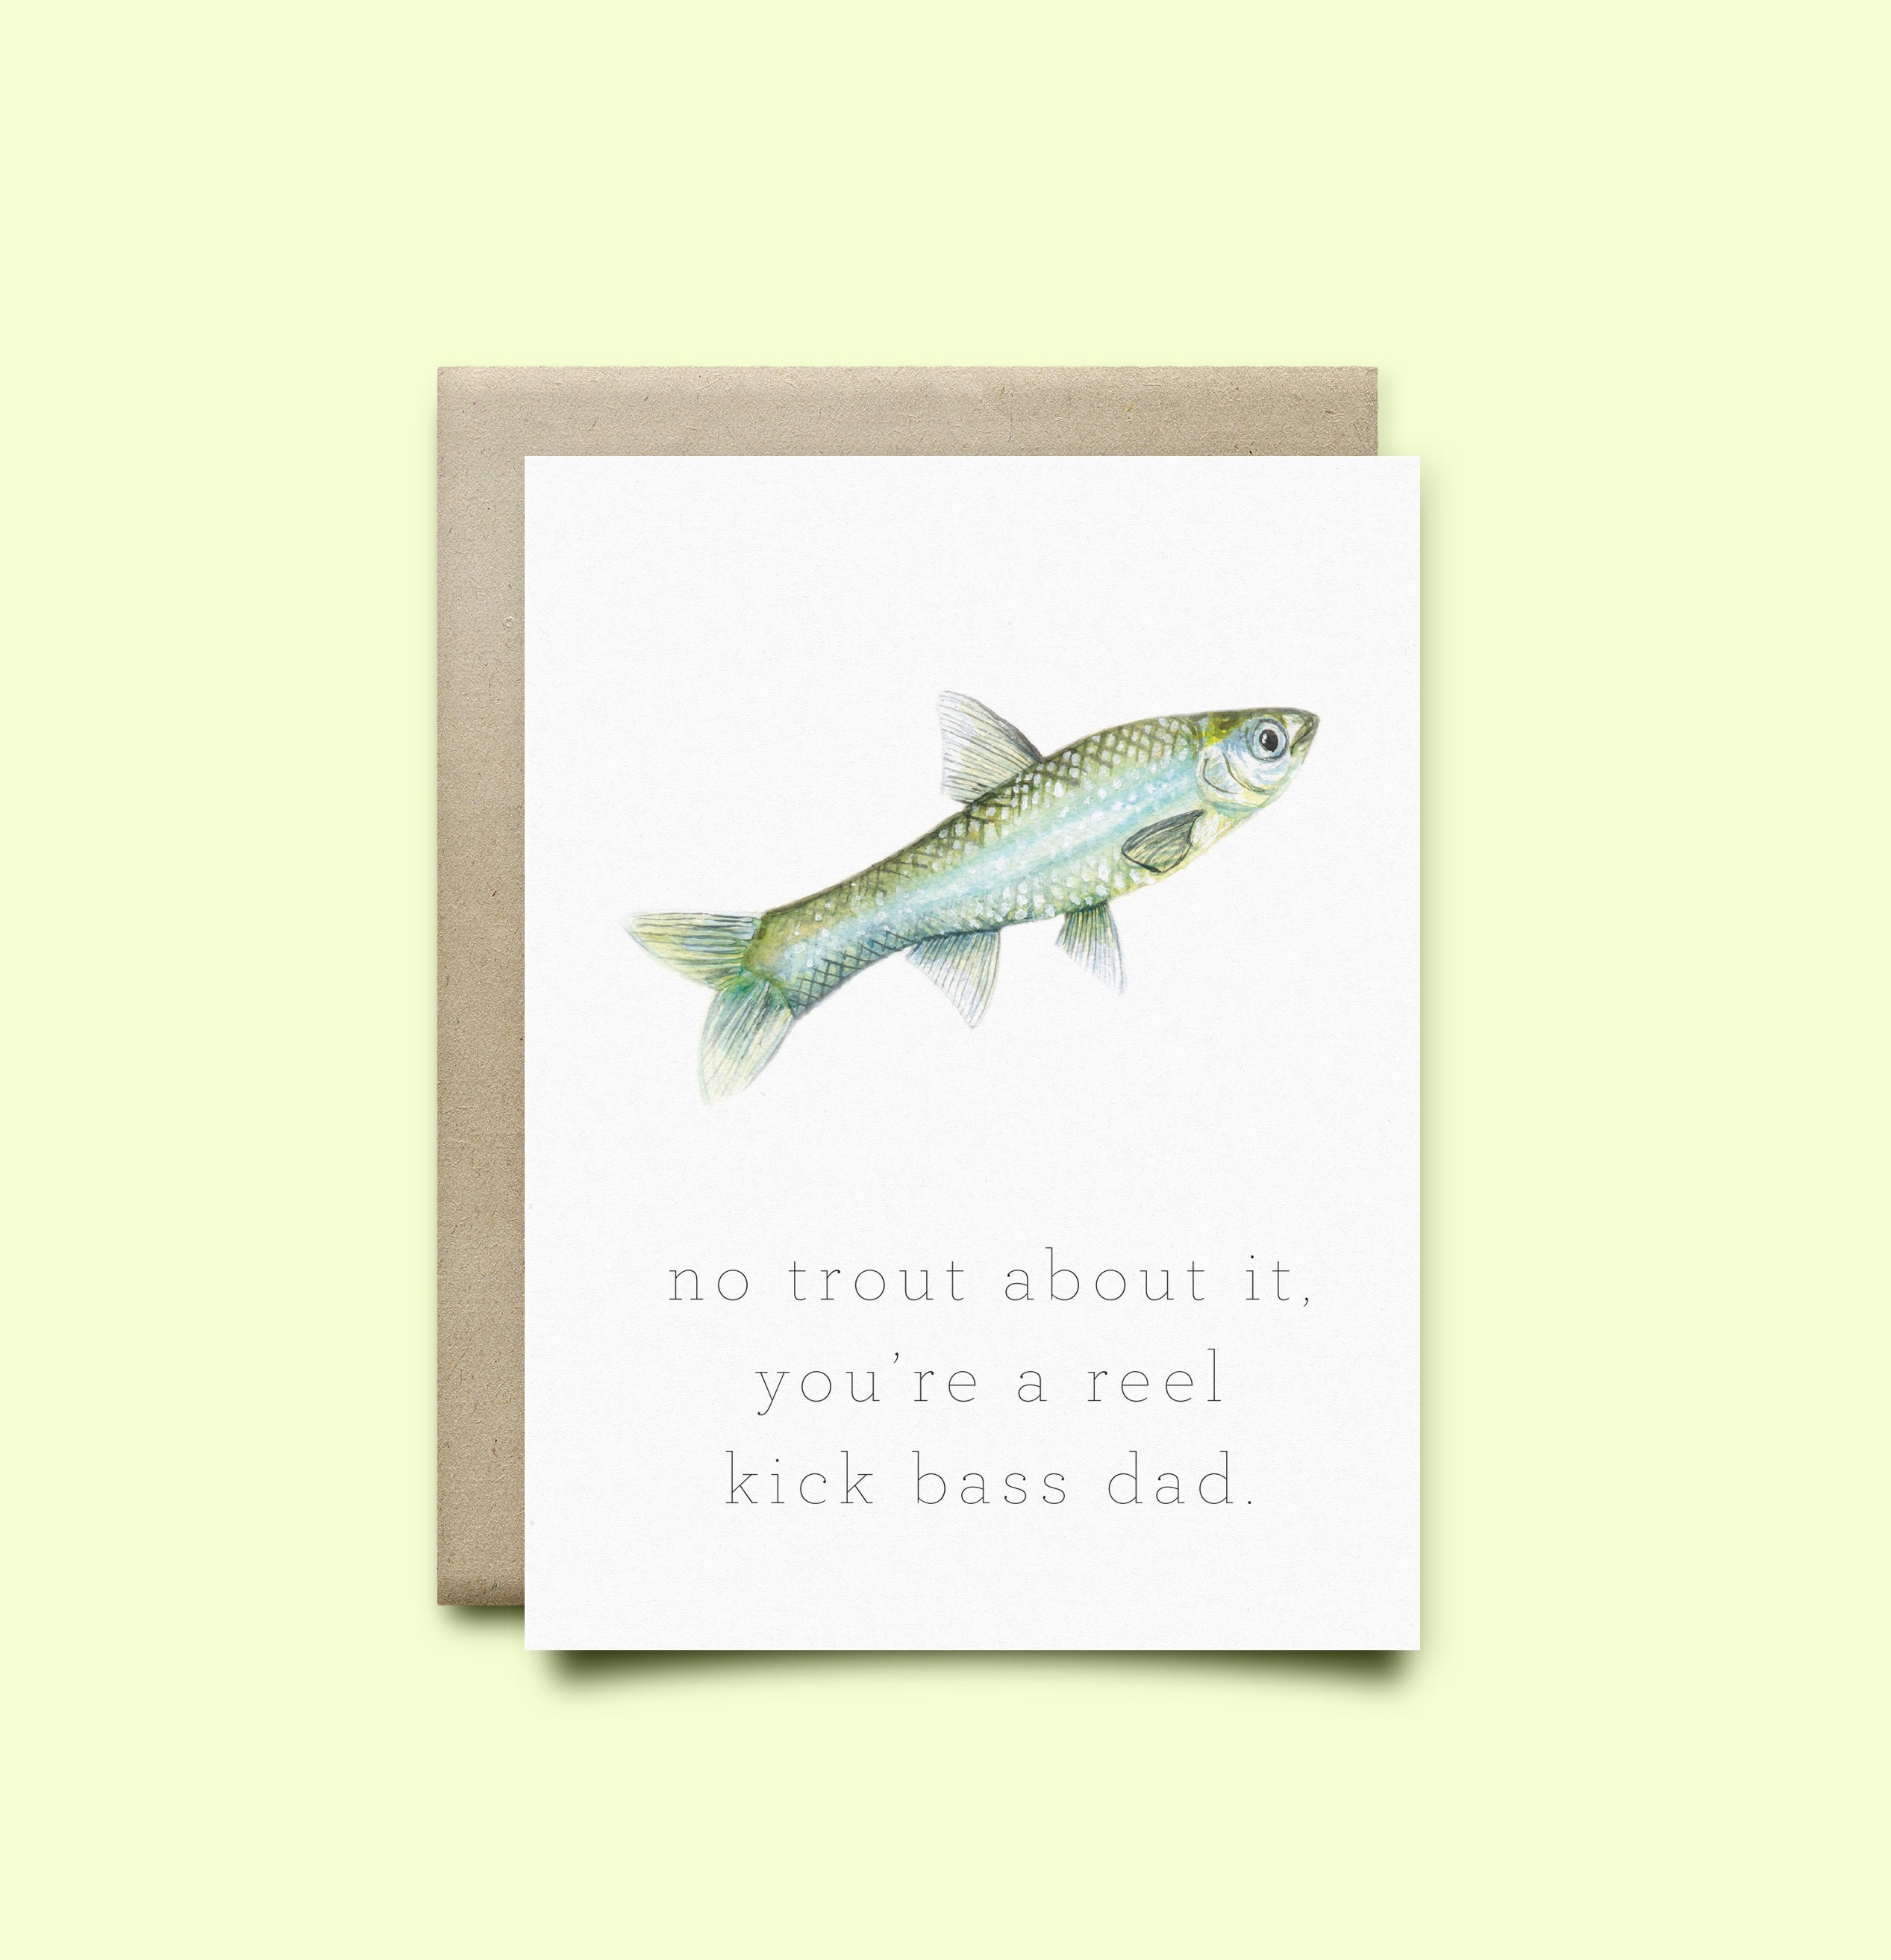 Father's Day Fishing Card. Fish Father's Day,fish Card,Funny Card,Funny dad  card,Card for dad,Funny father's day Card,Dad fish card,dad joke